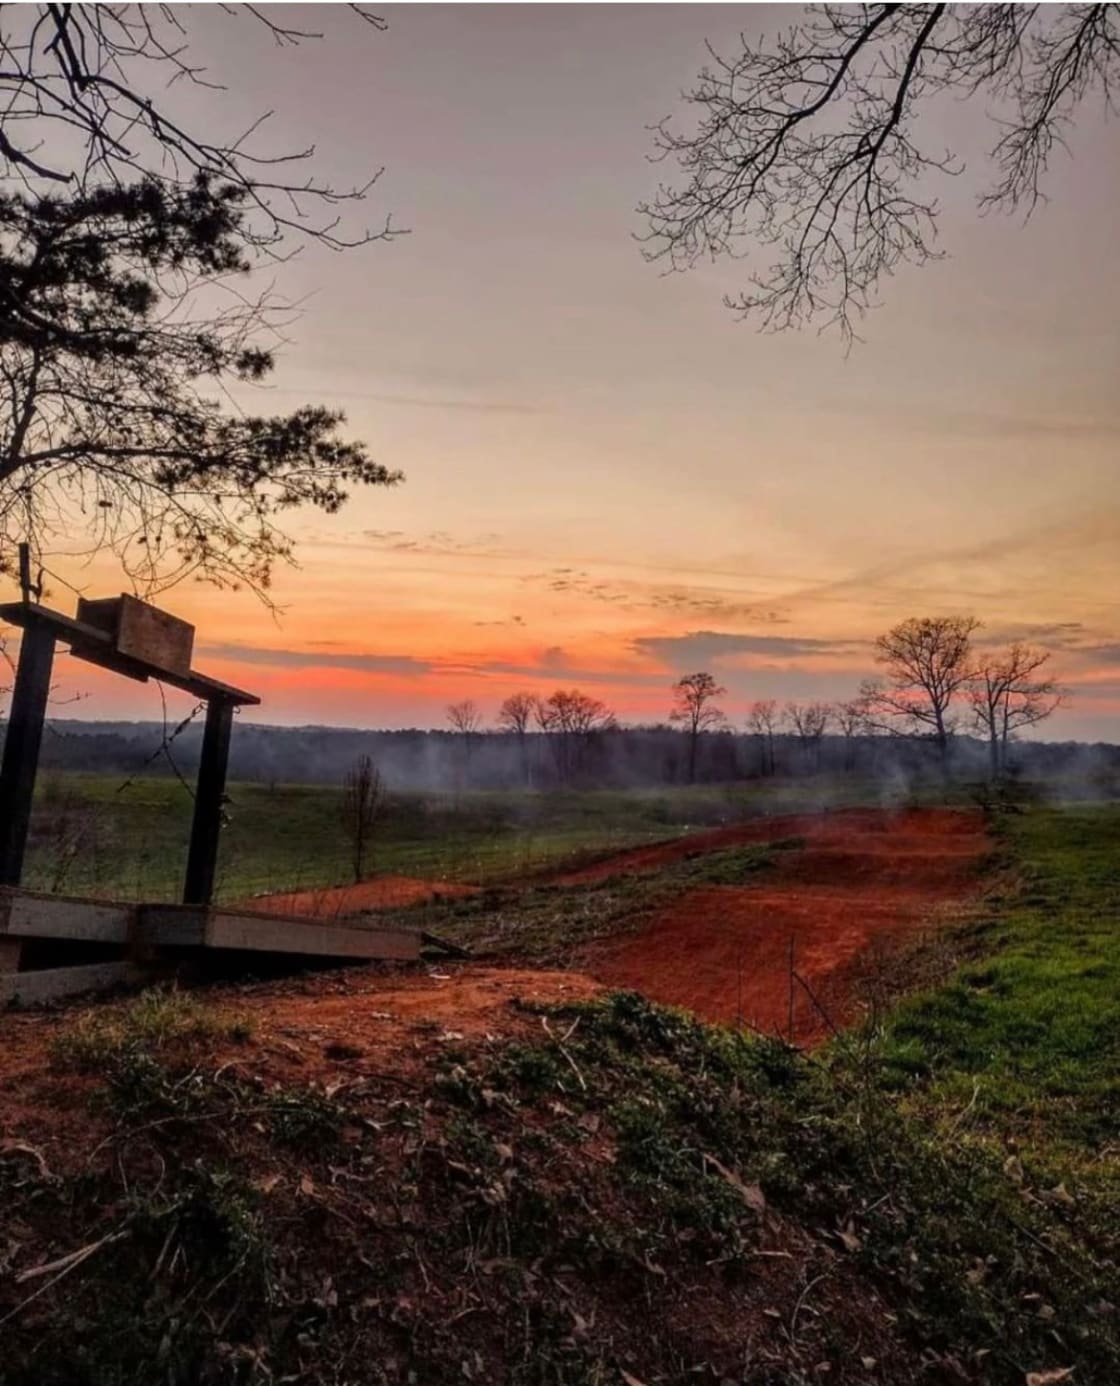 Dual slalom trail views of campgrounds and sunset
